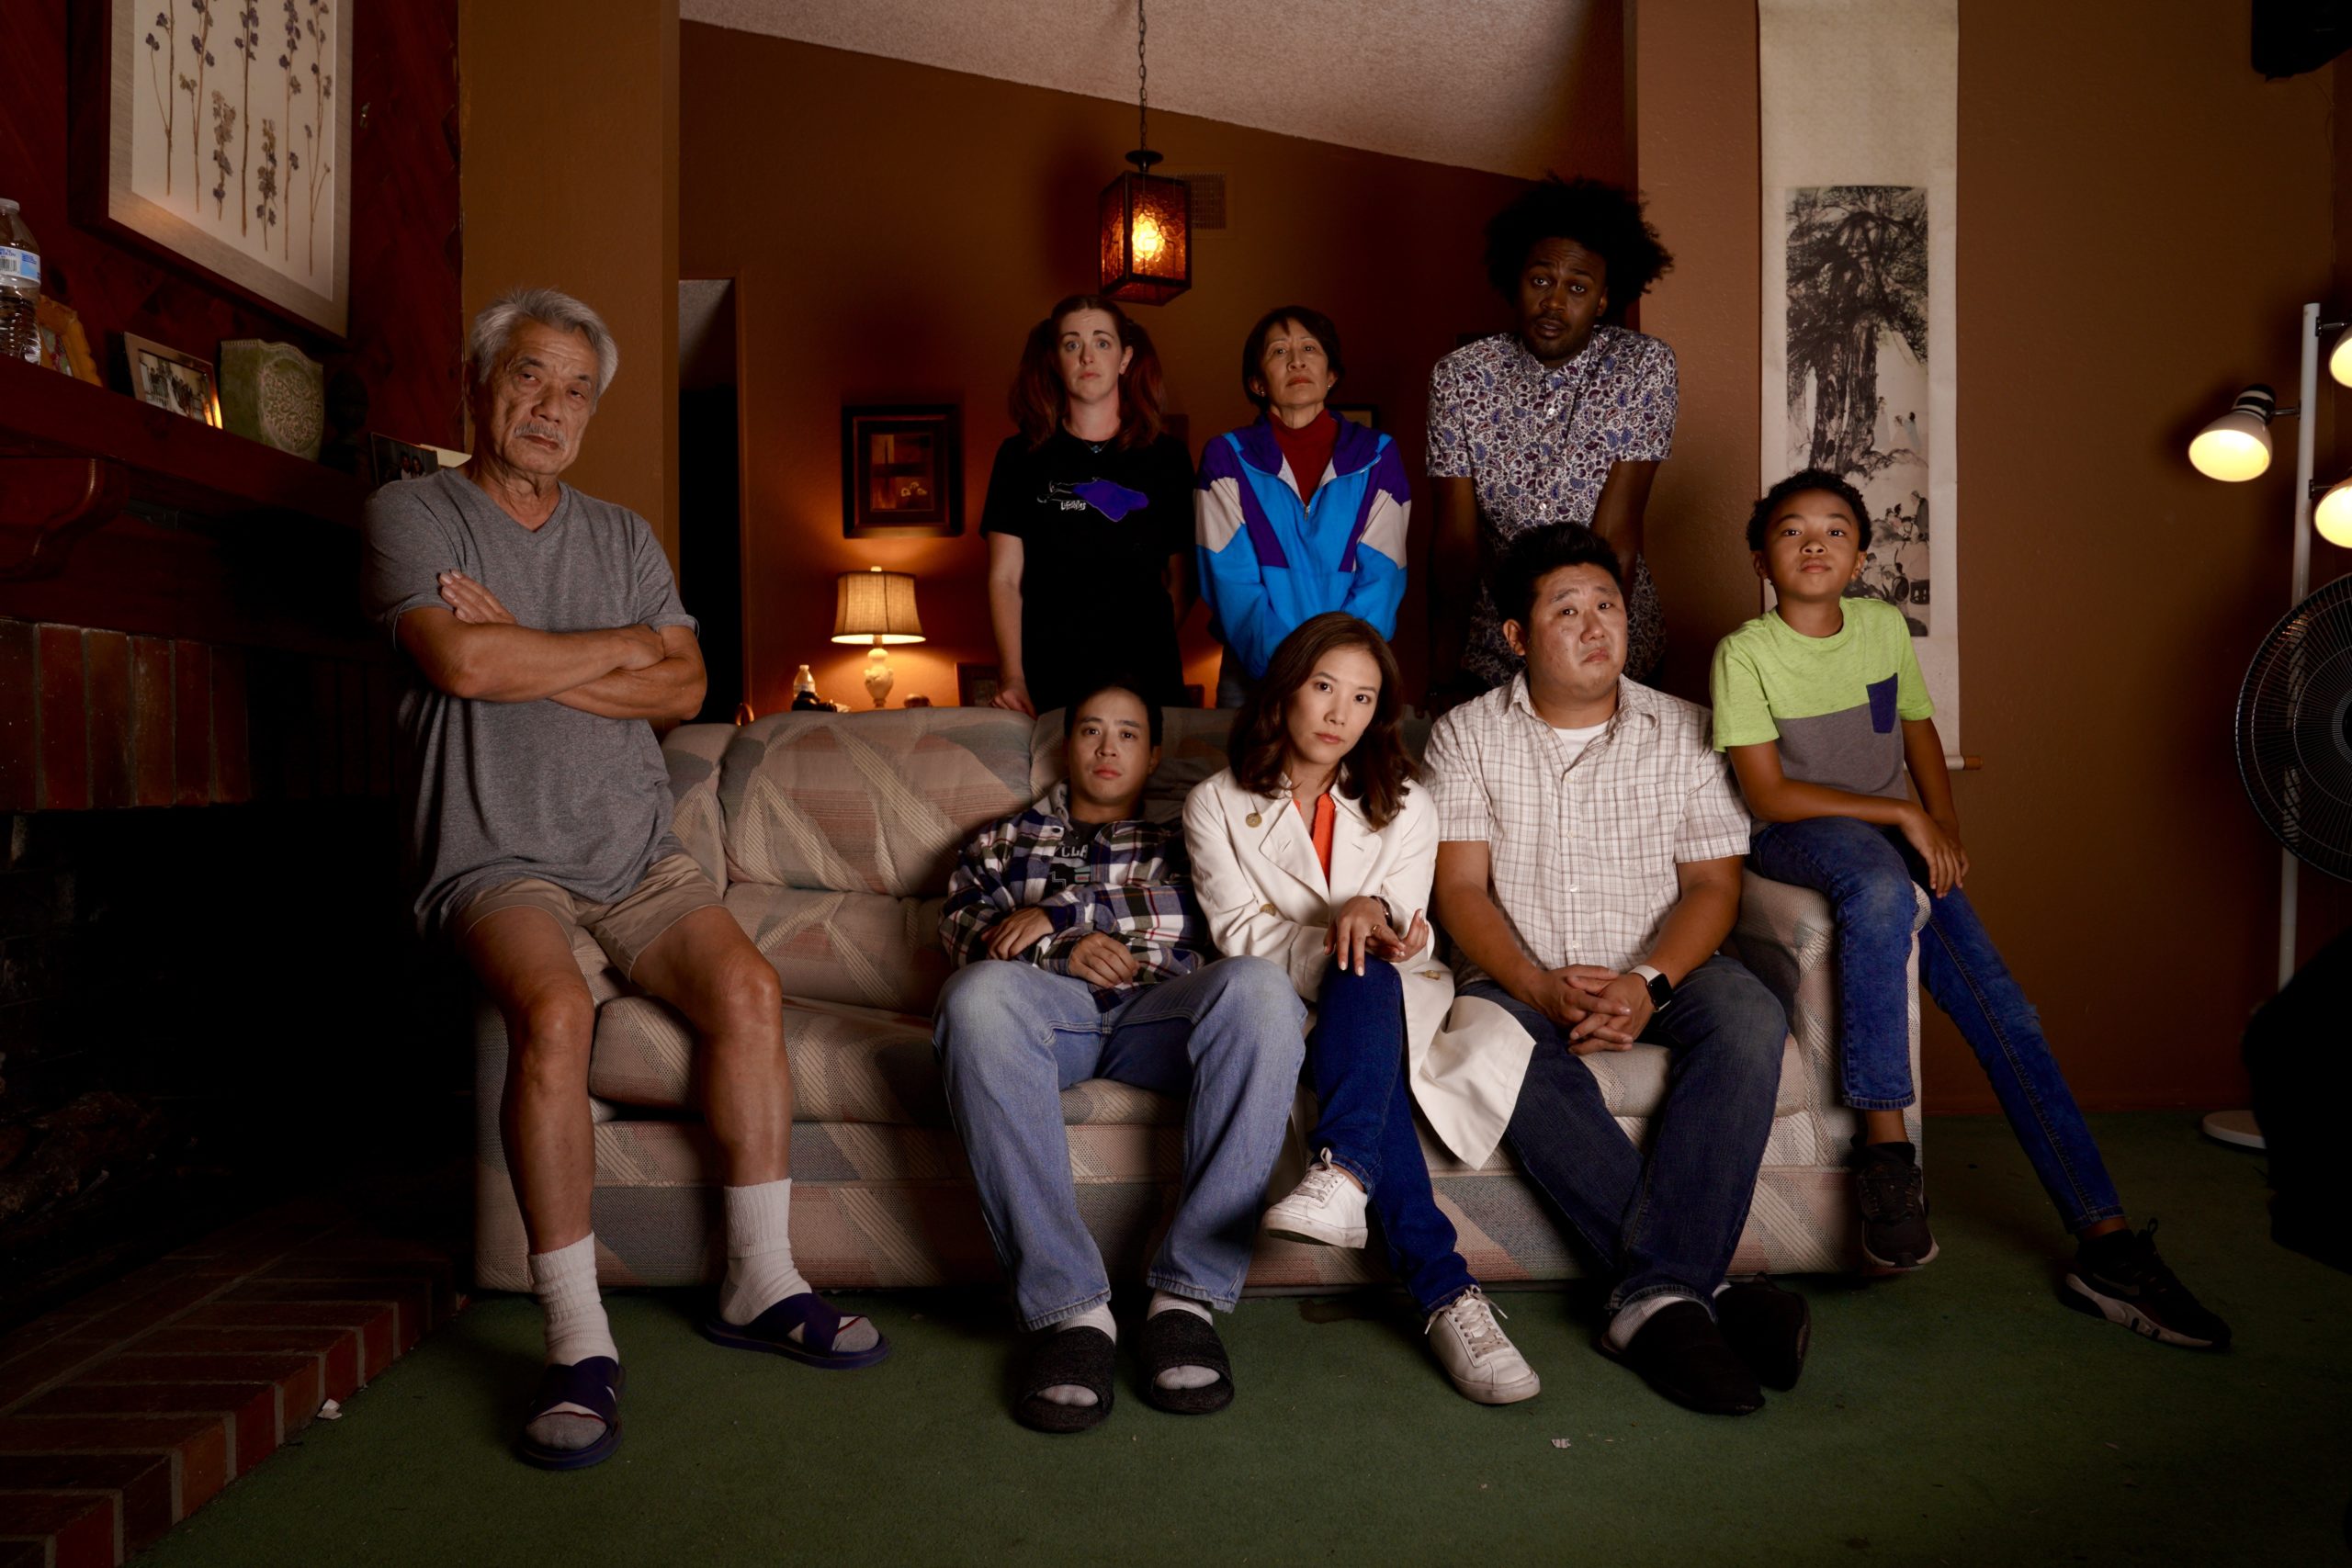 Dana Lee, an elderly Chinese man, sits with arms crossed on the edge of a couch, with the rest of the majority-Asian cast of "Dealing with Dad" posed around it.